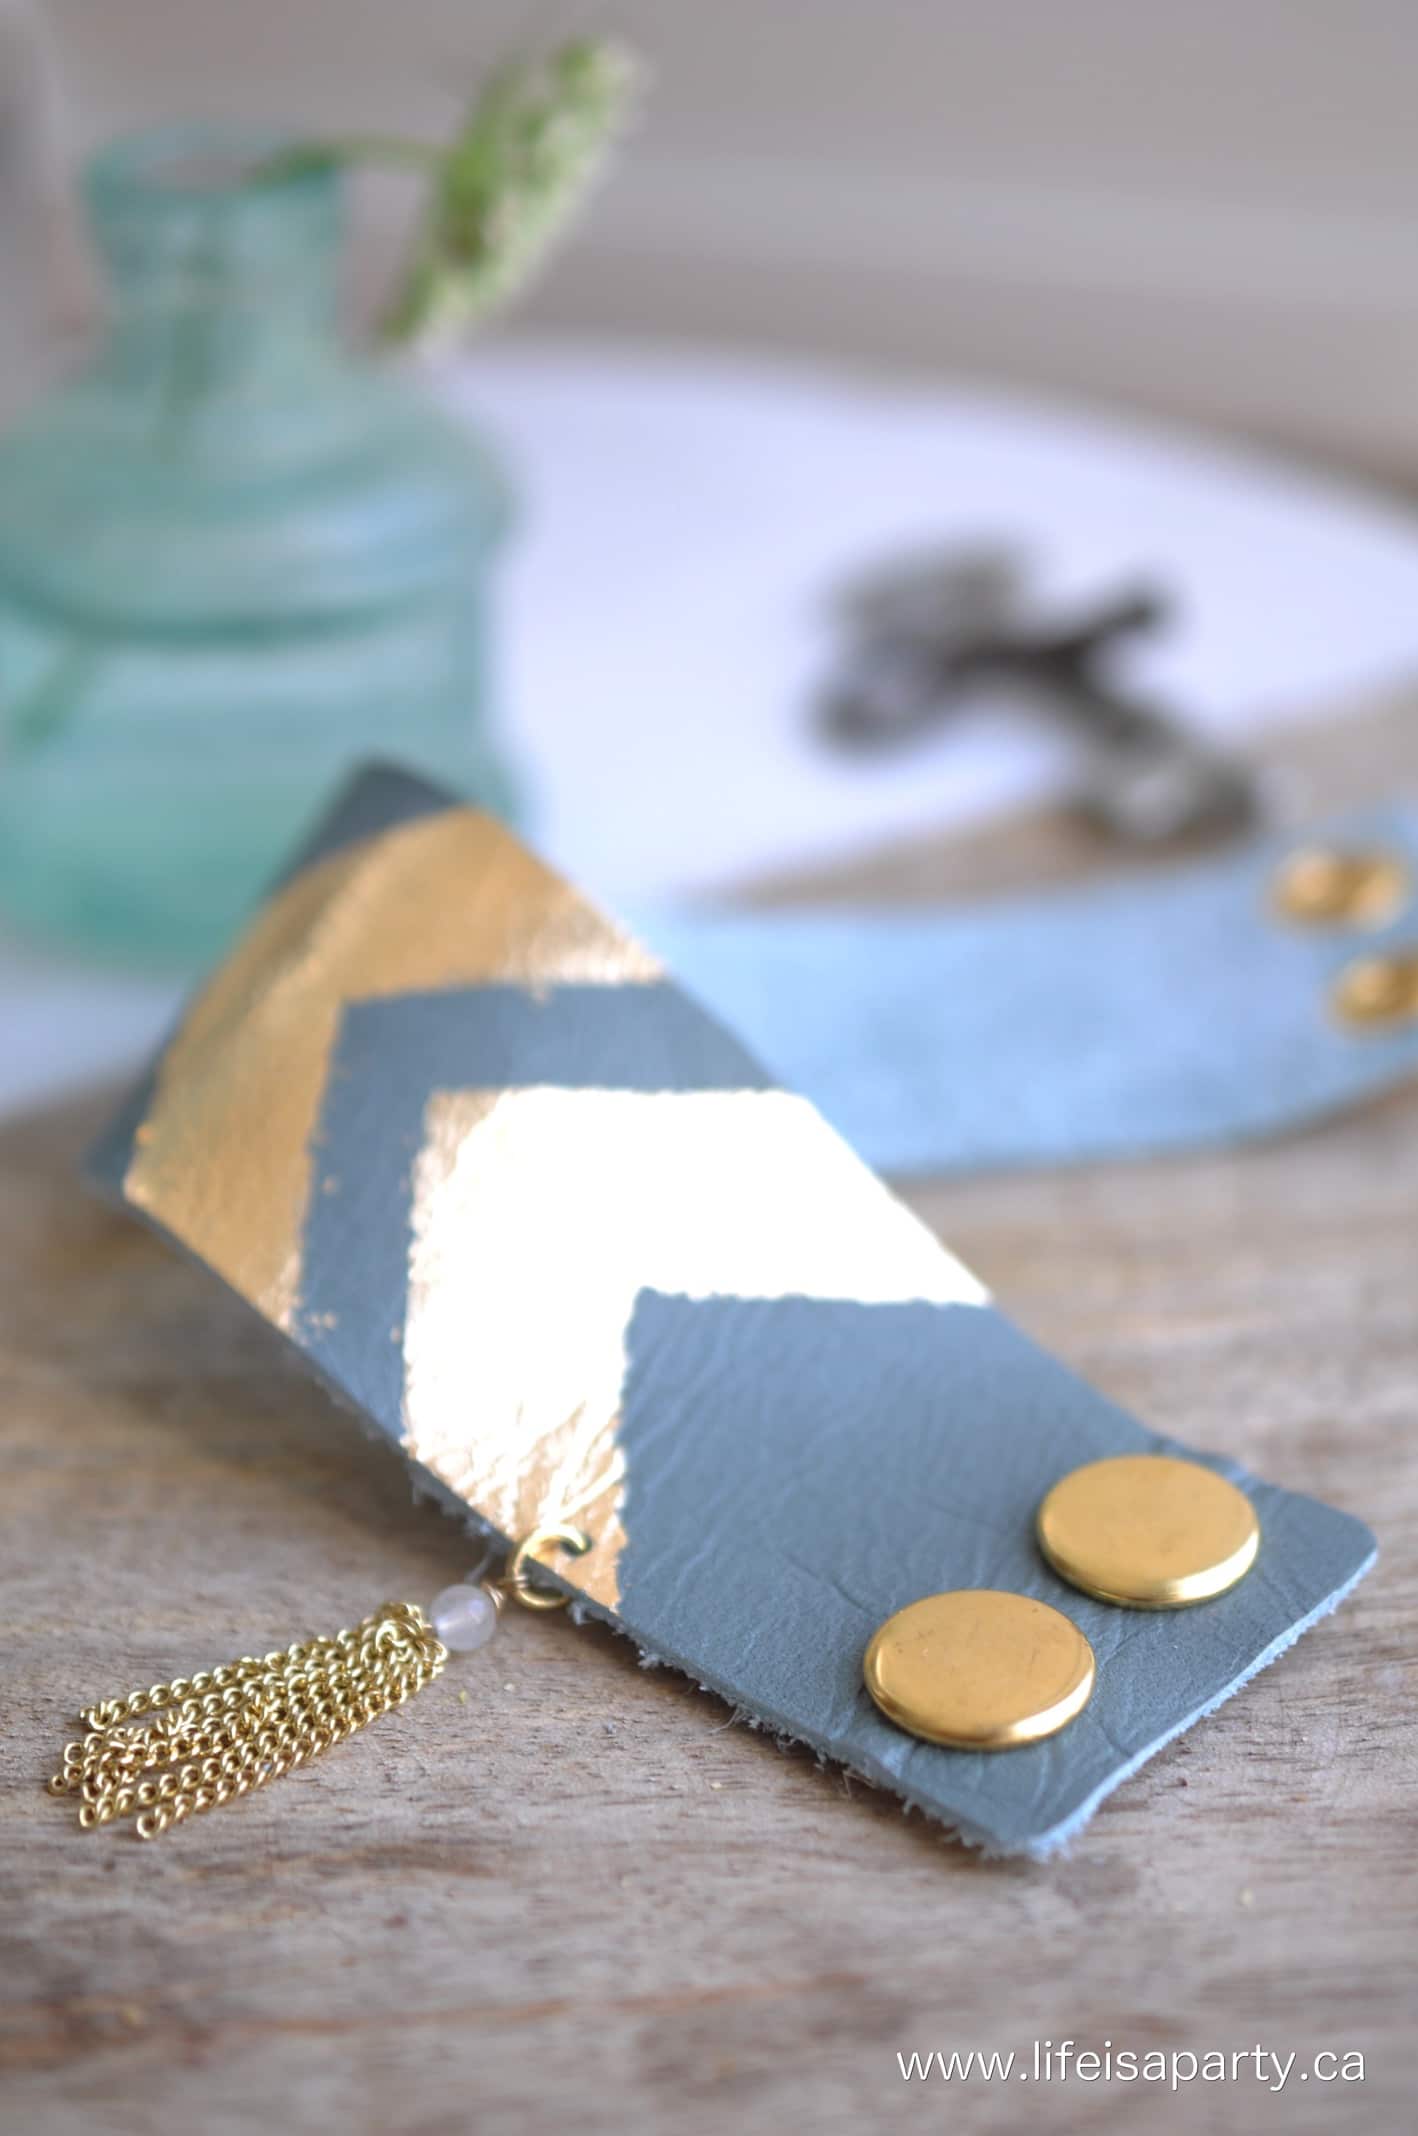 How To Make A Leather Cuff Bracelet: Create an amazing bracelet yourself, tutorial for adding snaps, gold leaf detail, and a tassel.